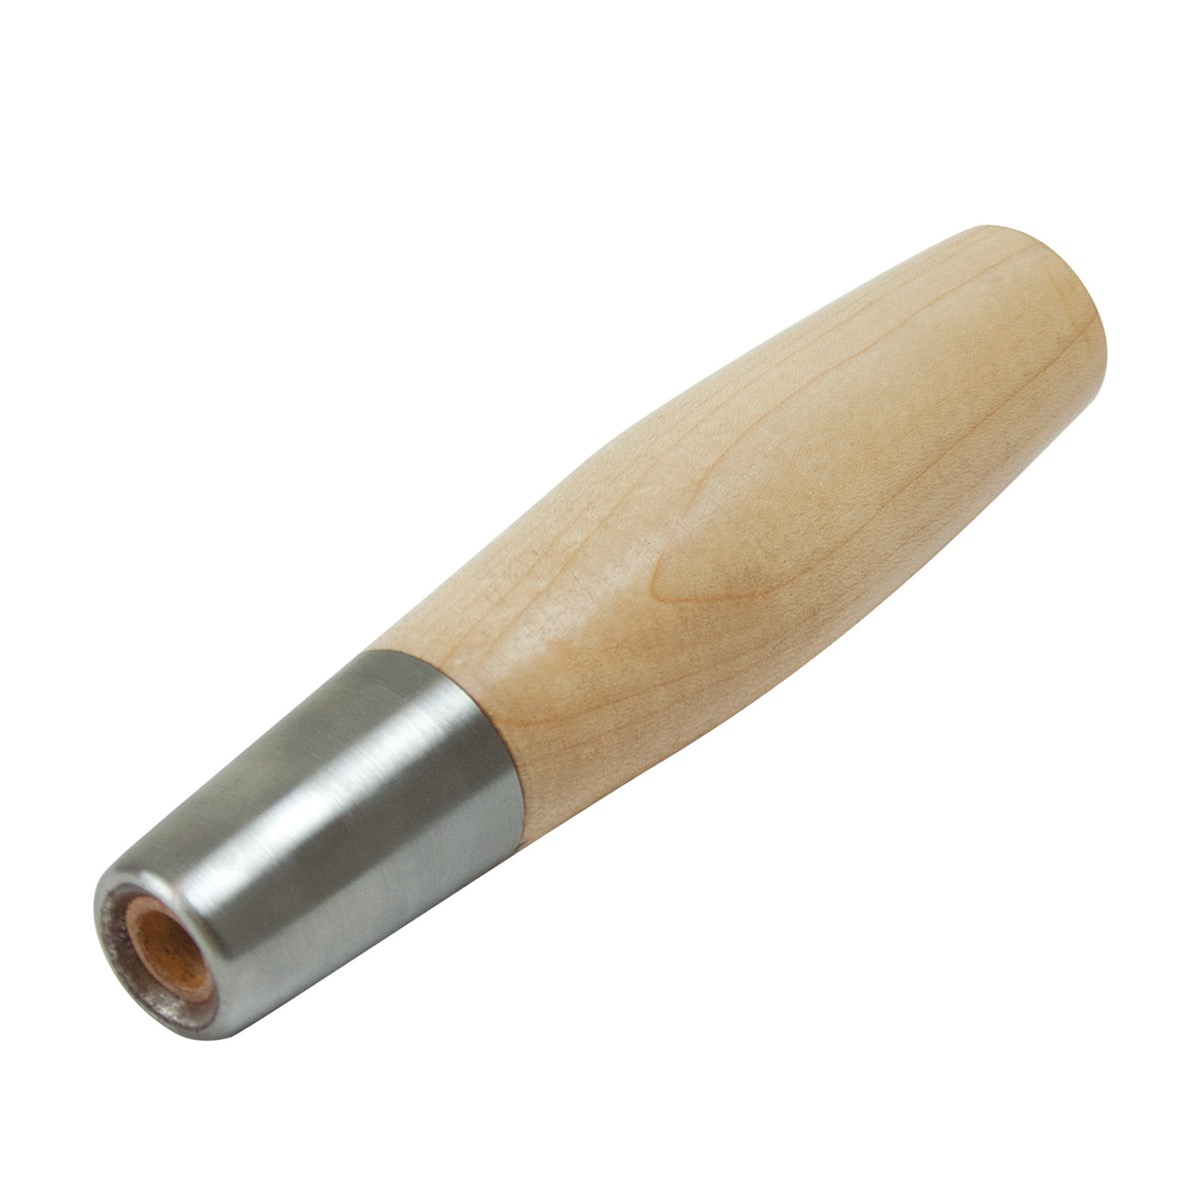 W.rose trowels are professional masonry tools and you can replace the handles if required. This wooden handle is available from Speedcrete, United Kingdom.